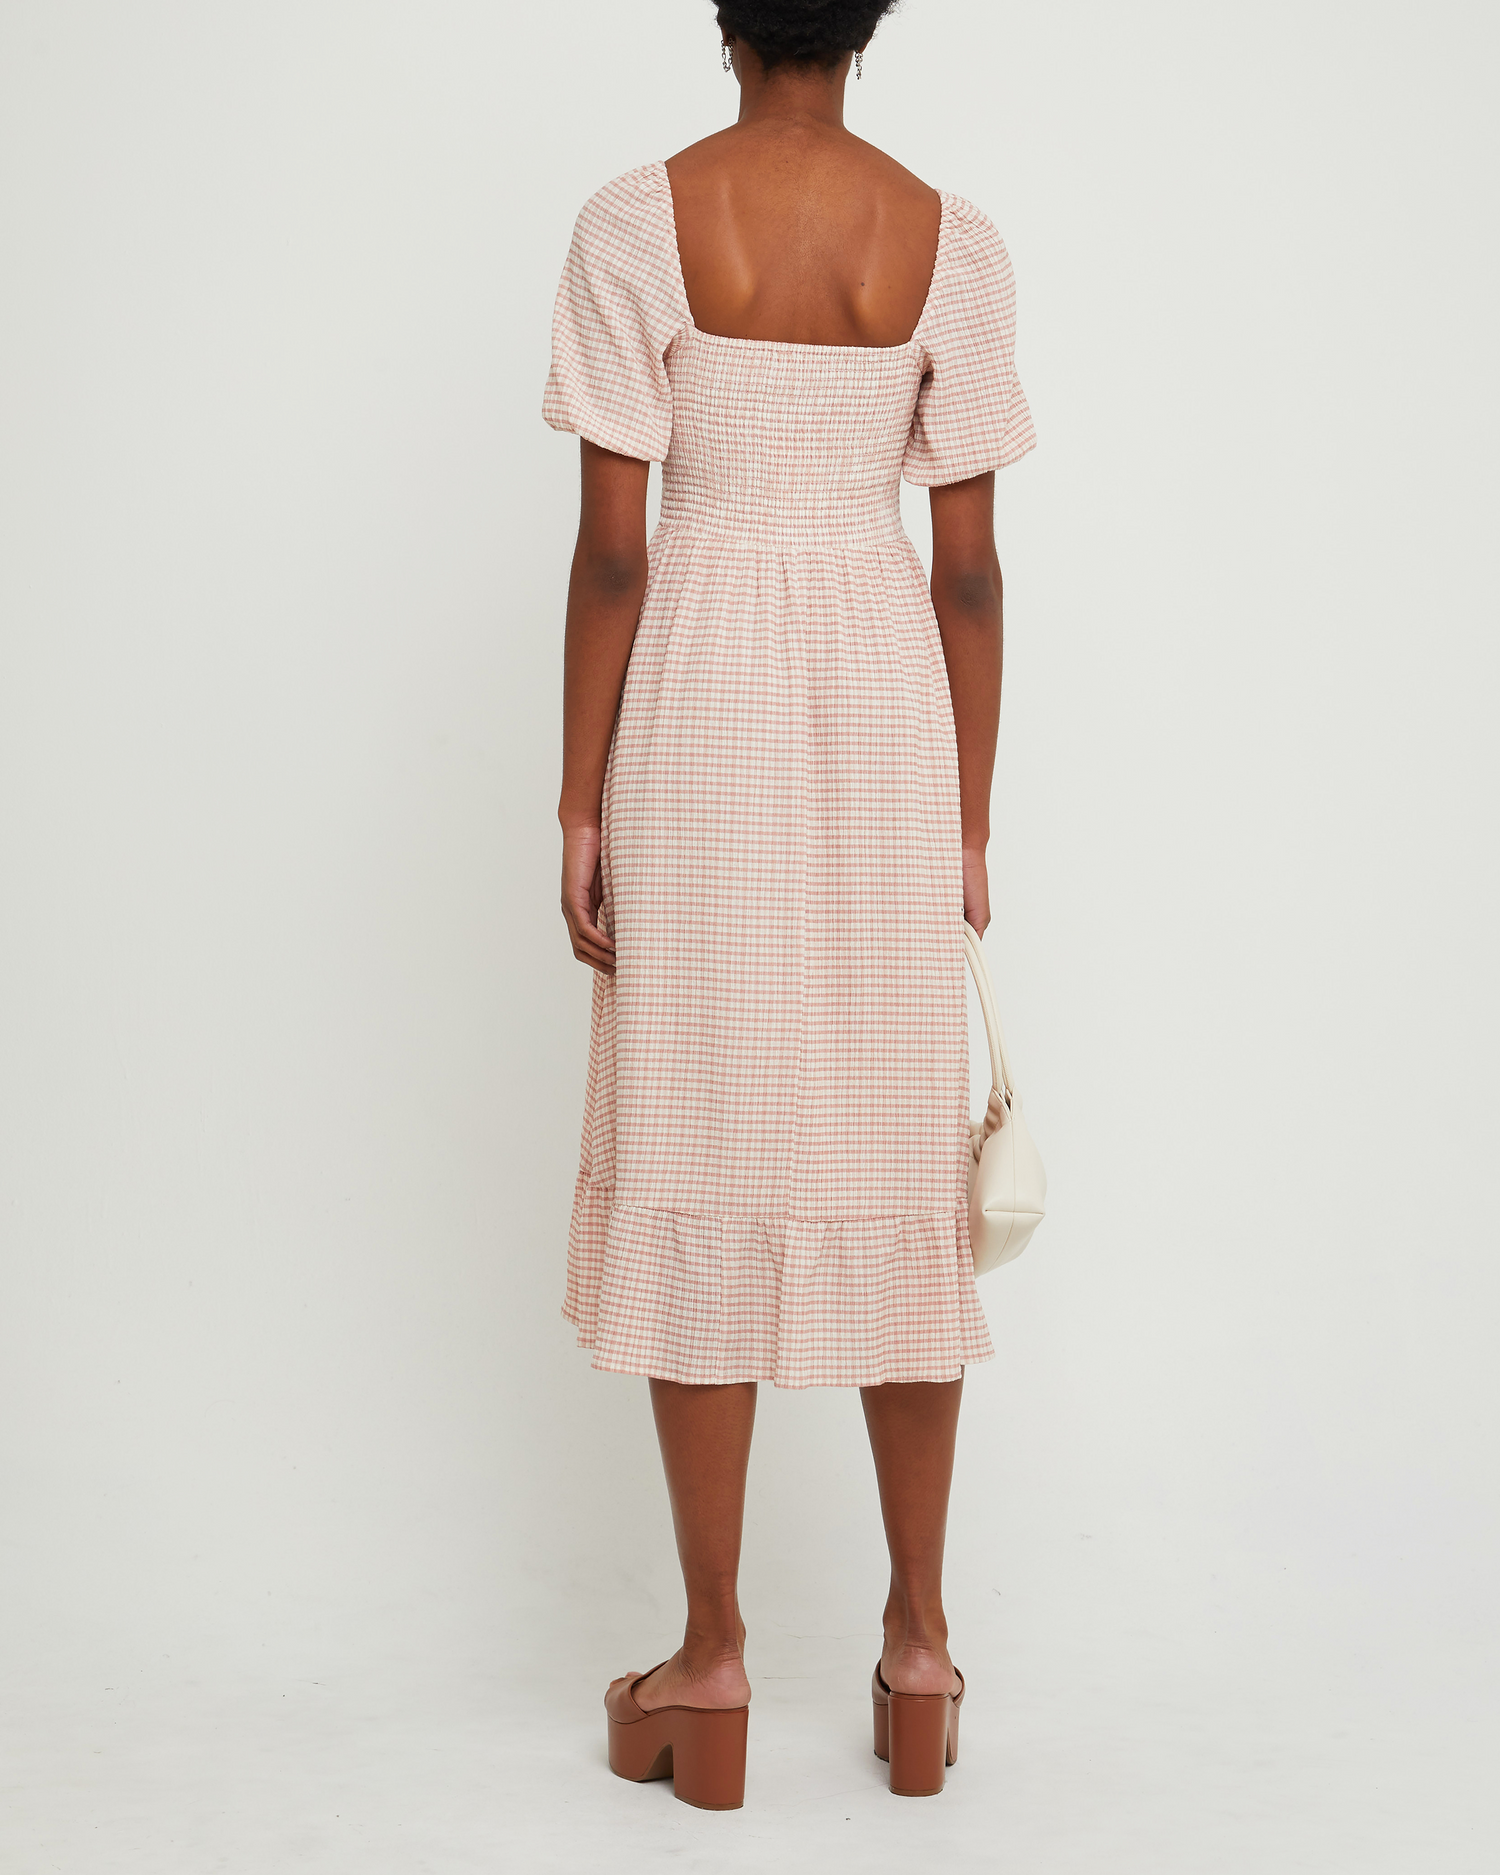 Second image of Daisy Midi Dress, a pink maxi dress, short sleeves, side slit, square neckline, smocked